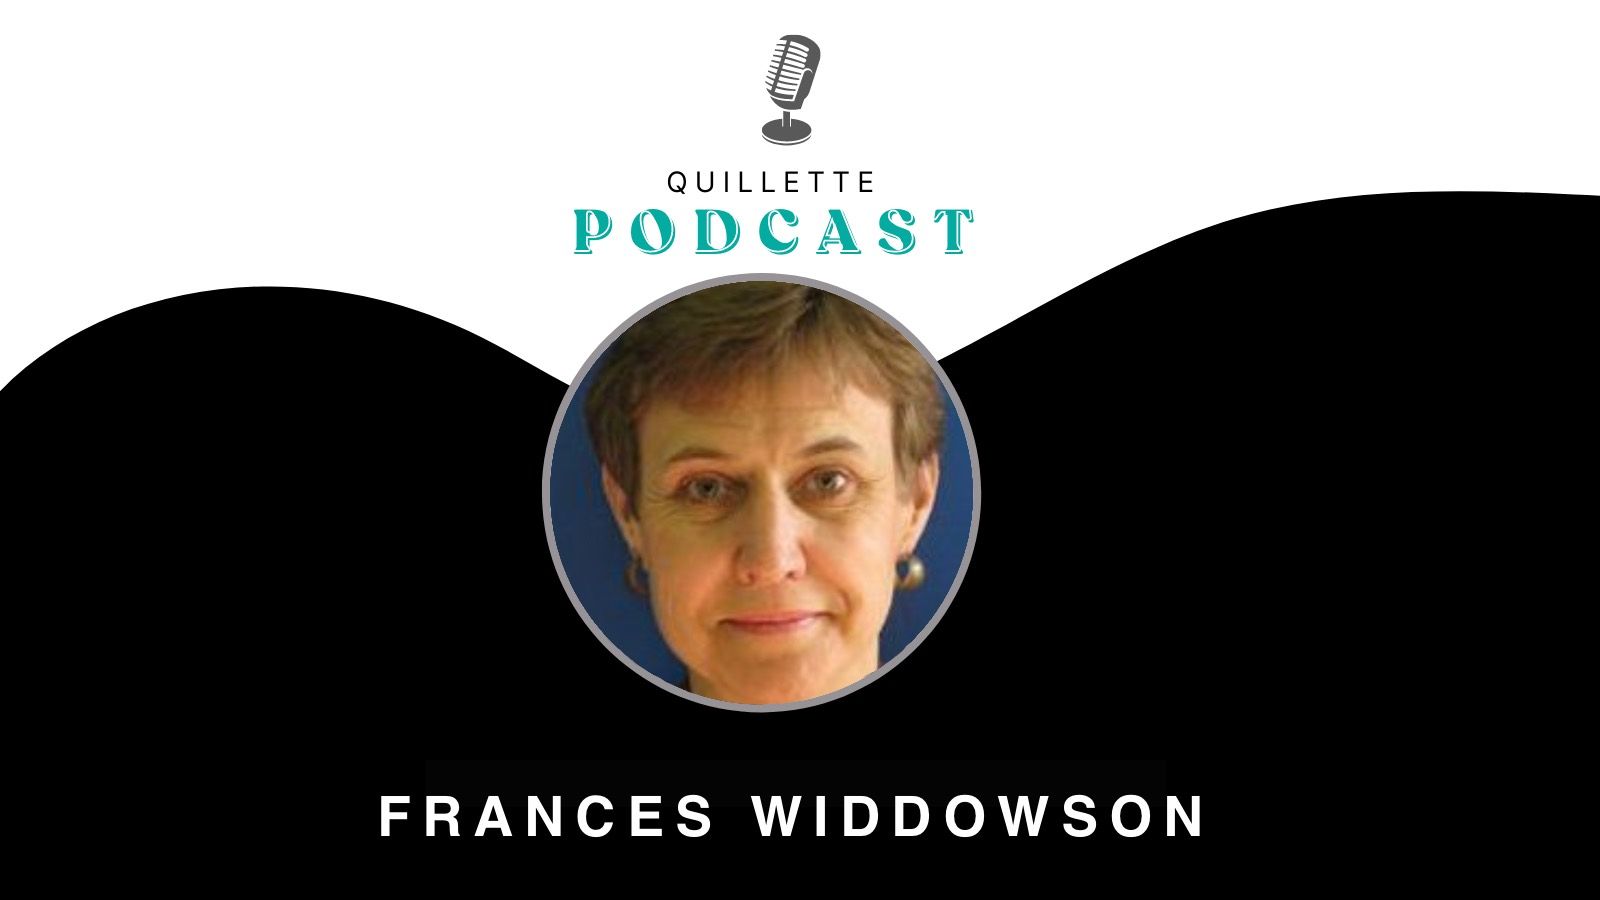 Quillette Podcast #186: Frances Widdowson on the Questions Canadians Aren’t Supposed to Ask About Unmarked Graves